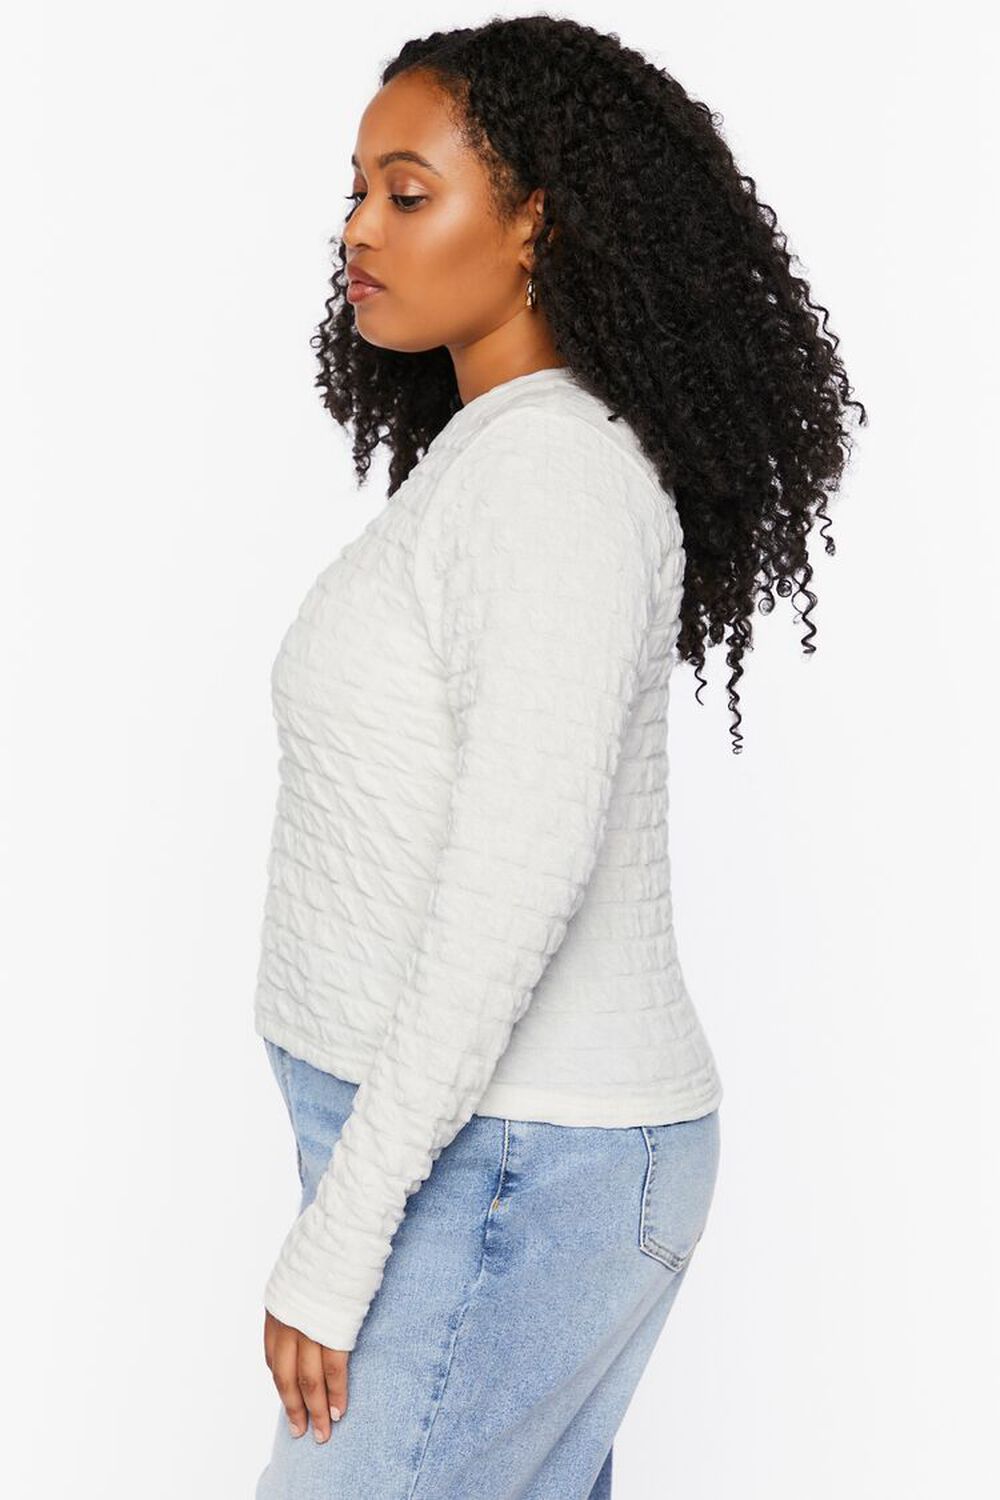 Plus Size Textured Long-Sleeve Top, image 2